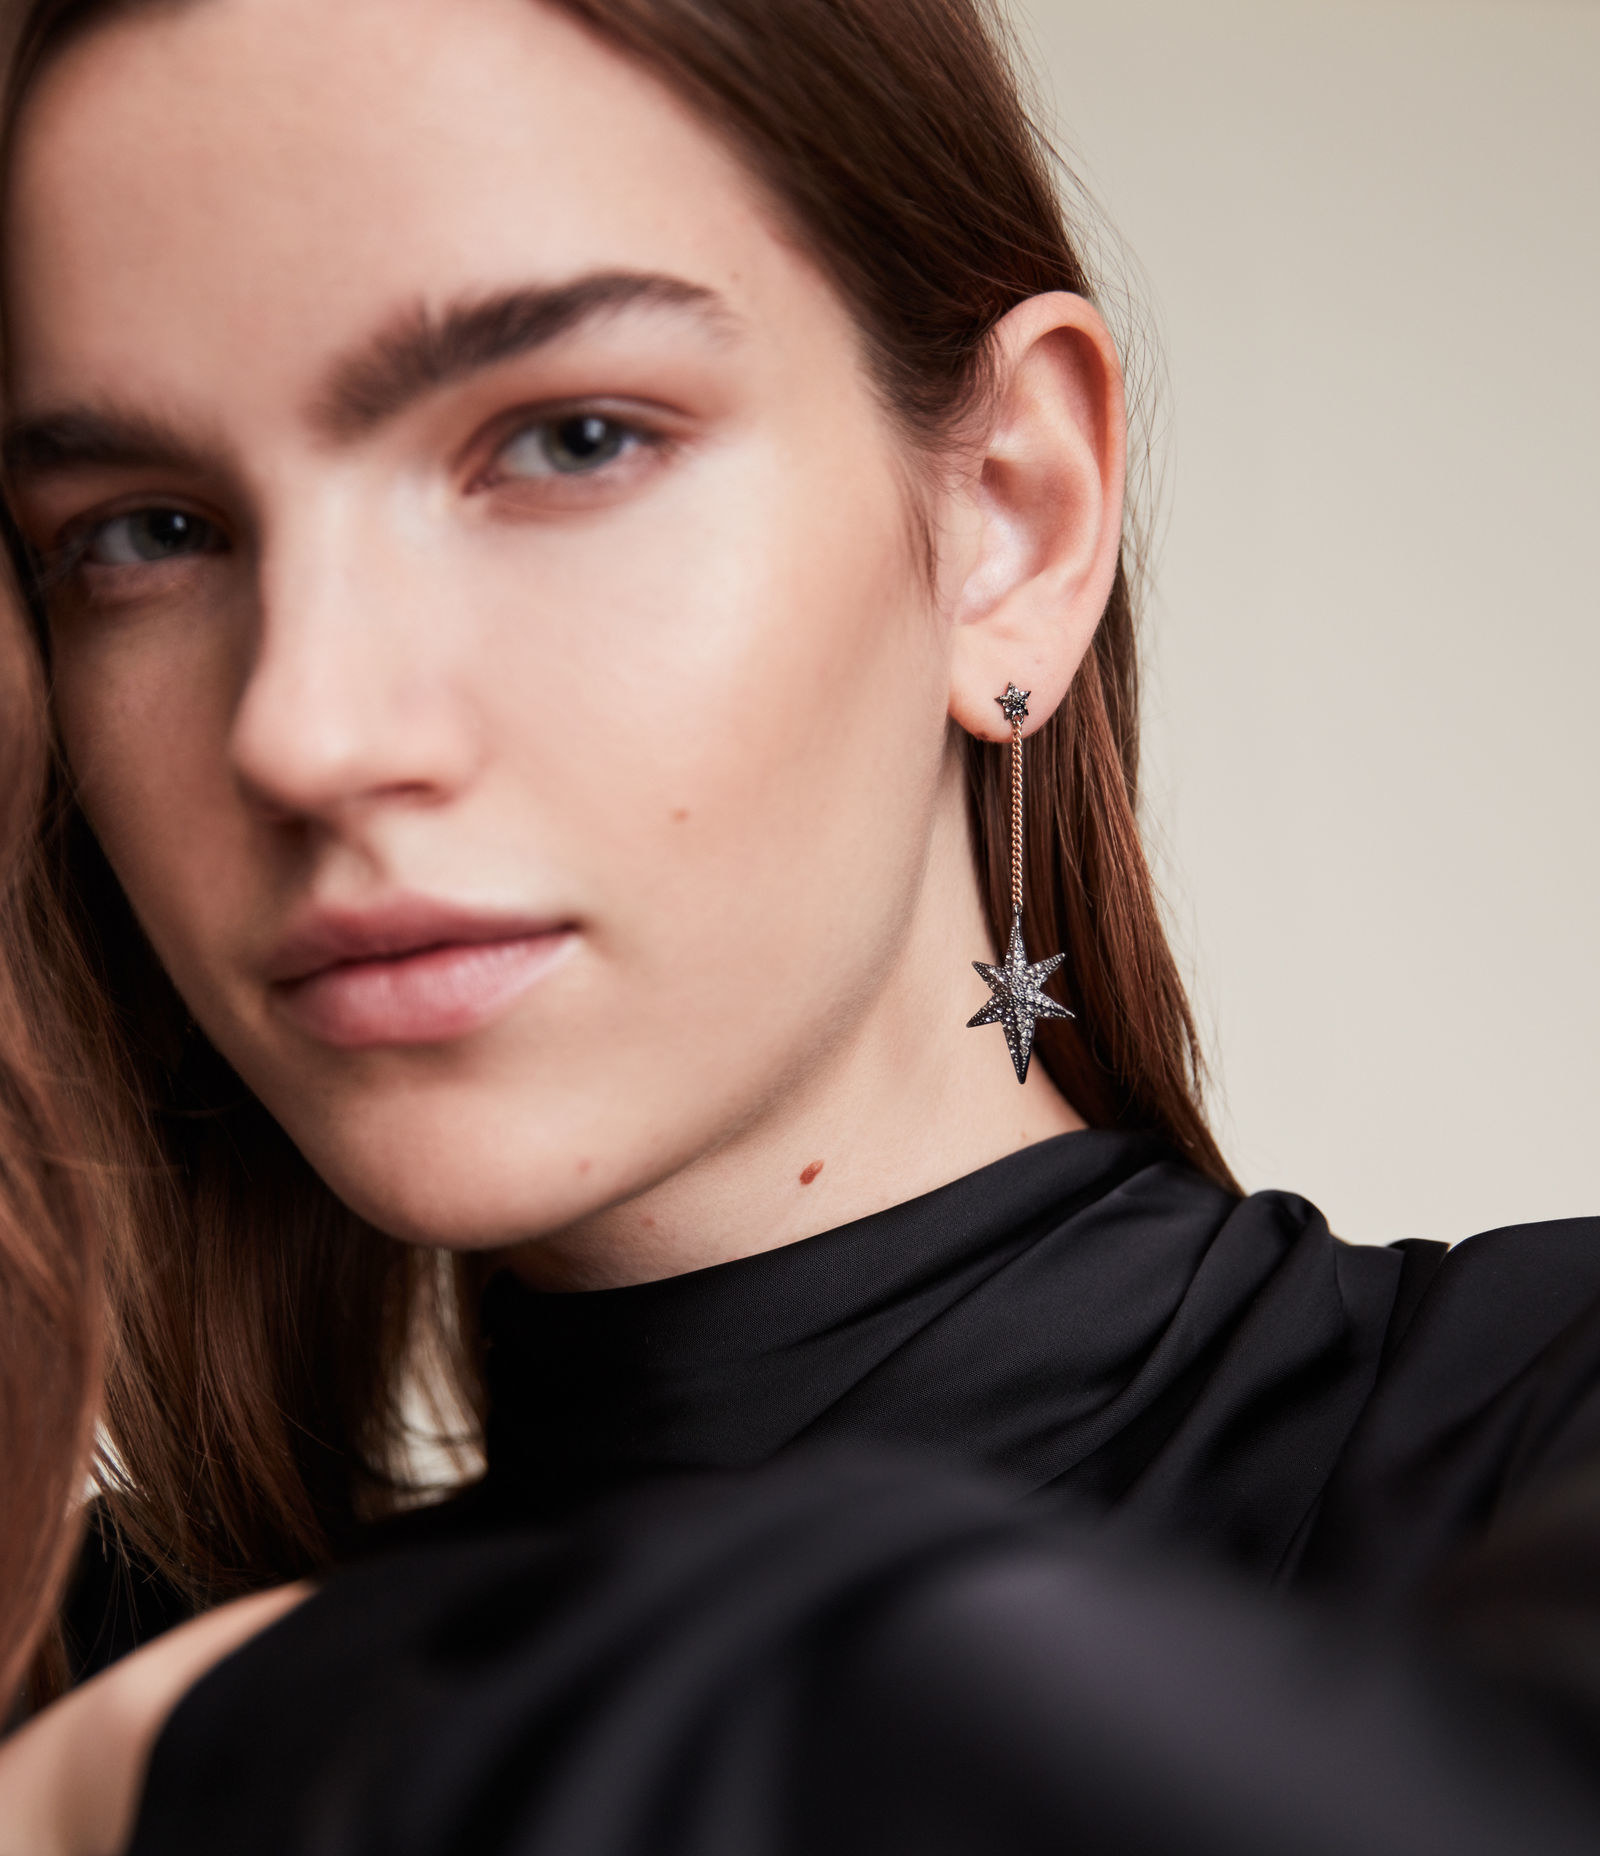 A model with the hematite and gold tone earrings, with a star on the lobe, and another larger star hanging from a dangle chain